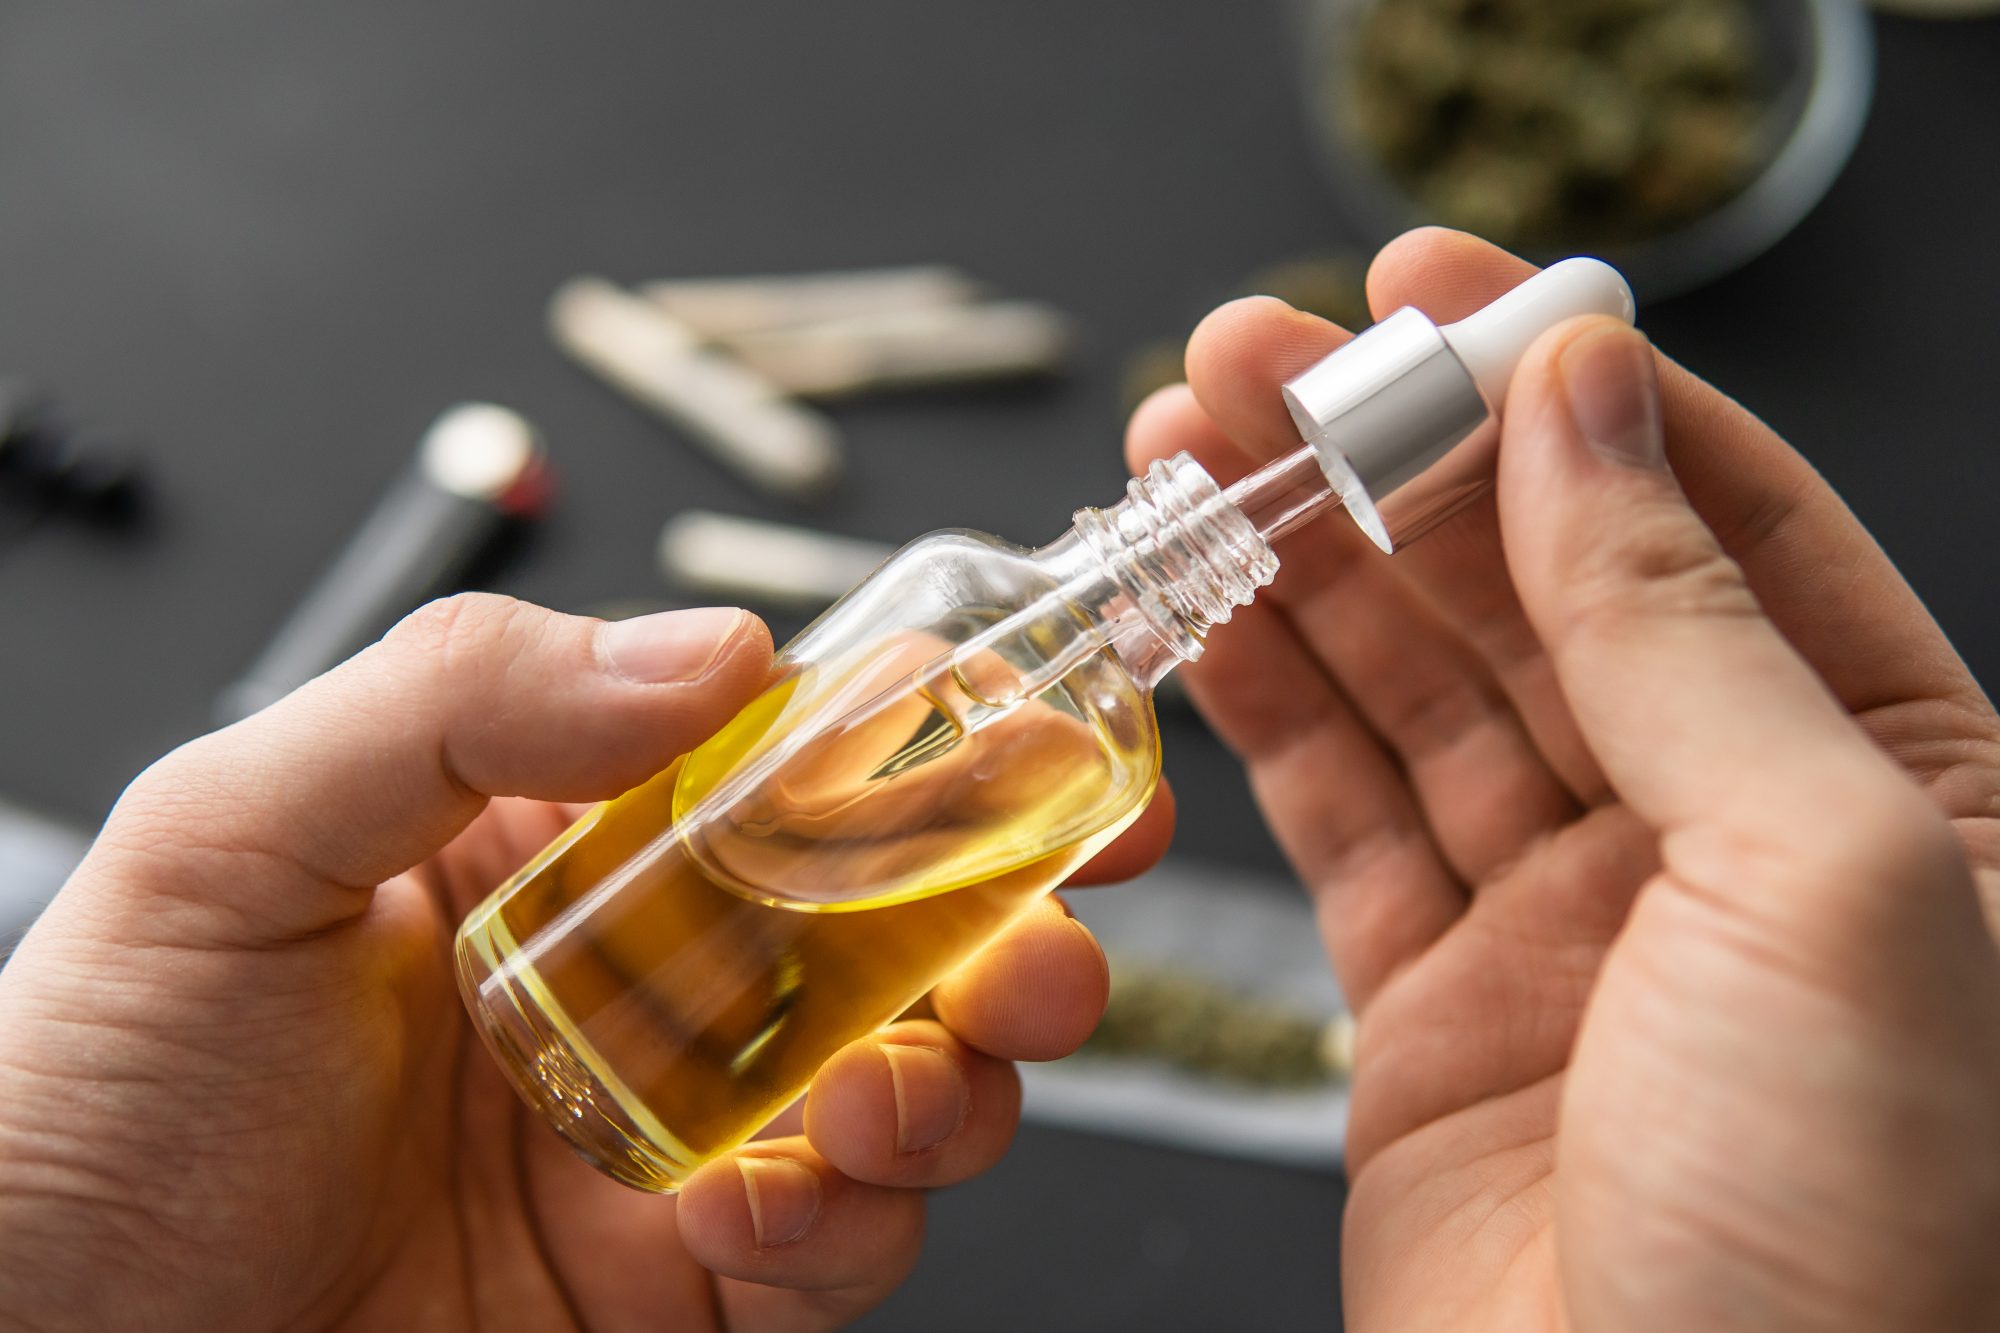 The medicinal benefits of CBD oil and medical cannabis